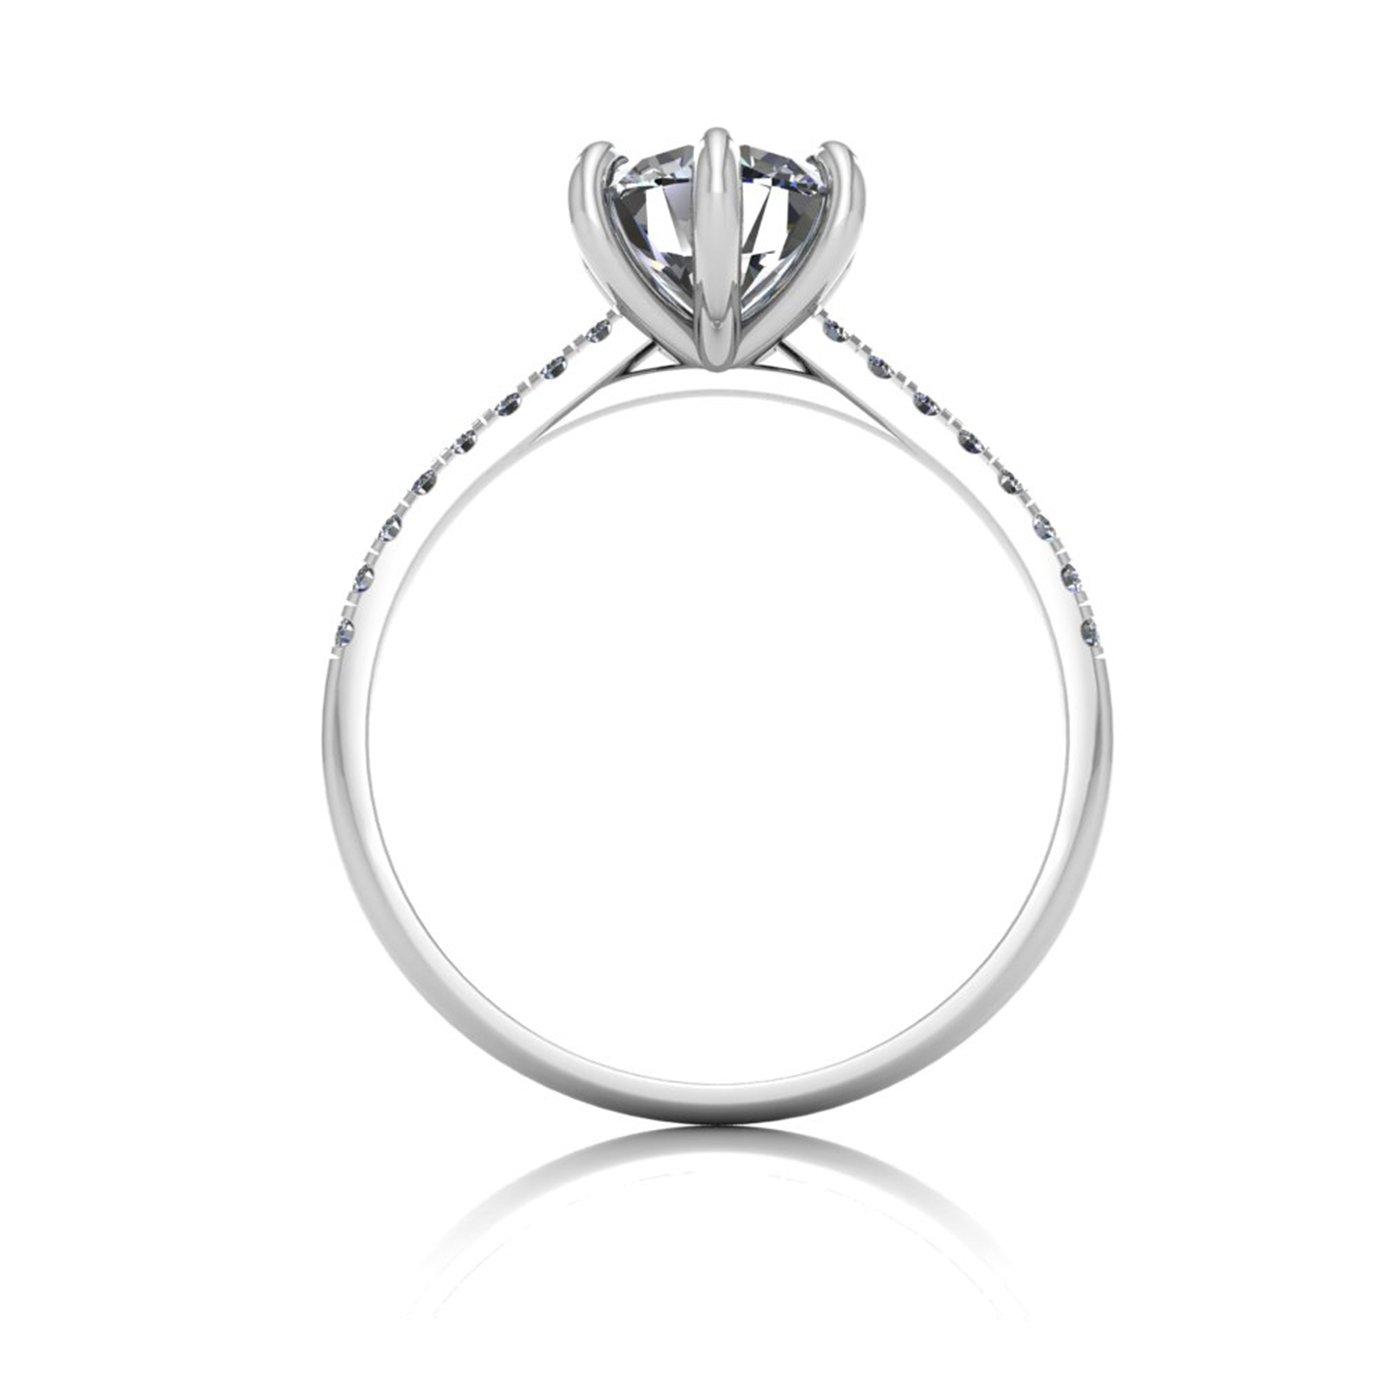 18k white gold 1,20 ct 6 prongs round cut diamond engagement ring with whisper thin pavÉ set band